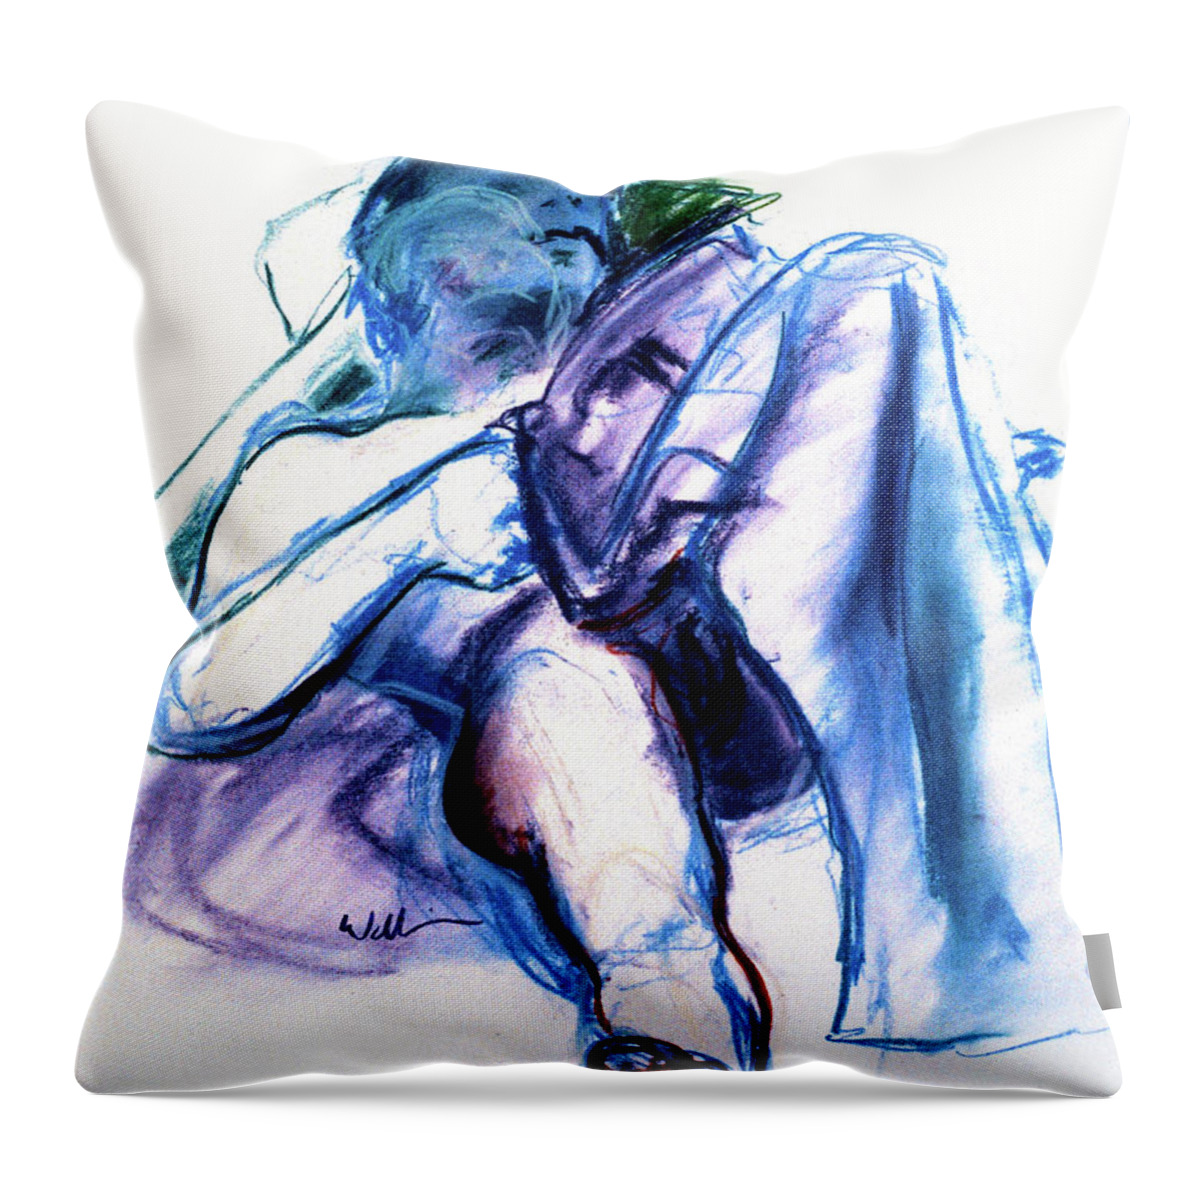 A Set Of Figure Studies Throw Pillow featuring the drawing Figure Study Eleven by Scott Wallin